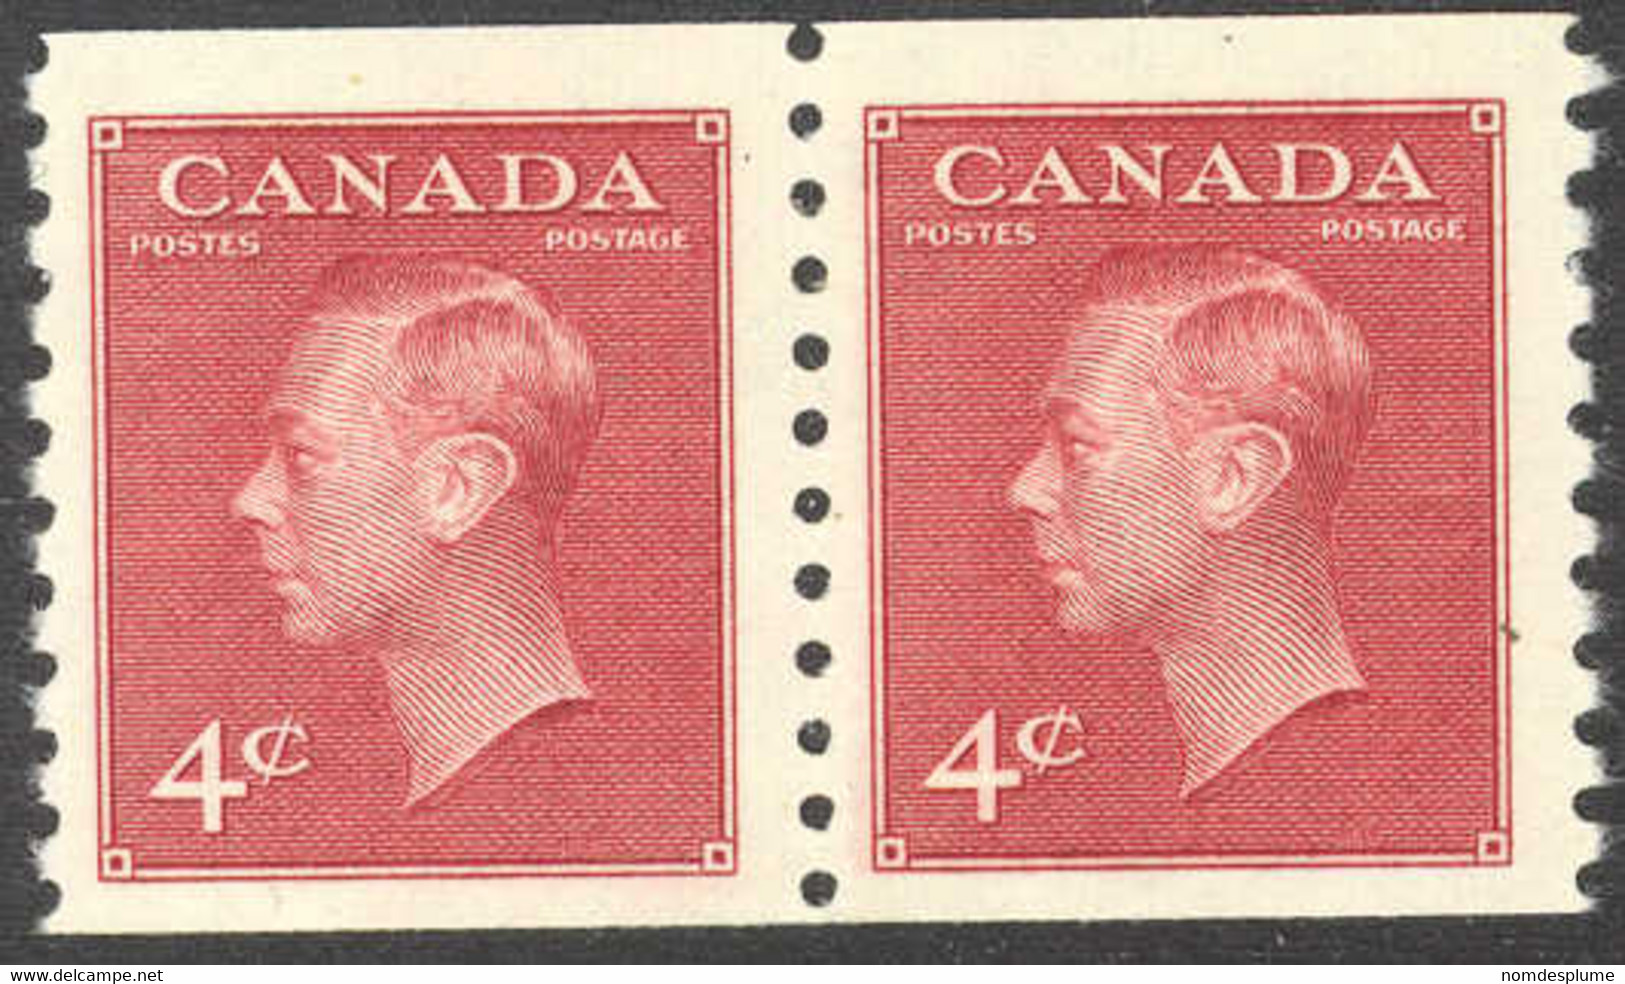 1438) Canada 300 George VI Coil Mint 1950 - Coil Stamps